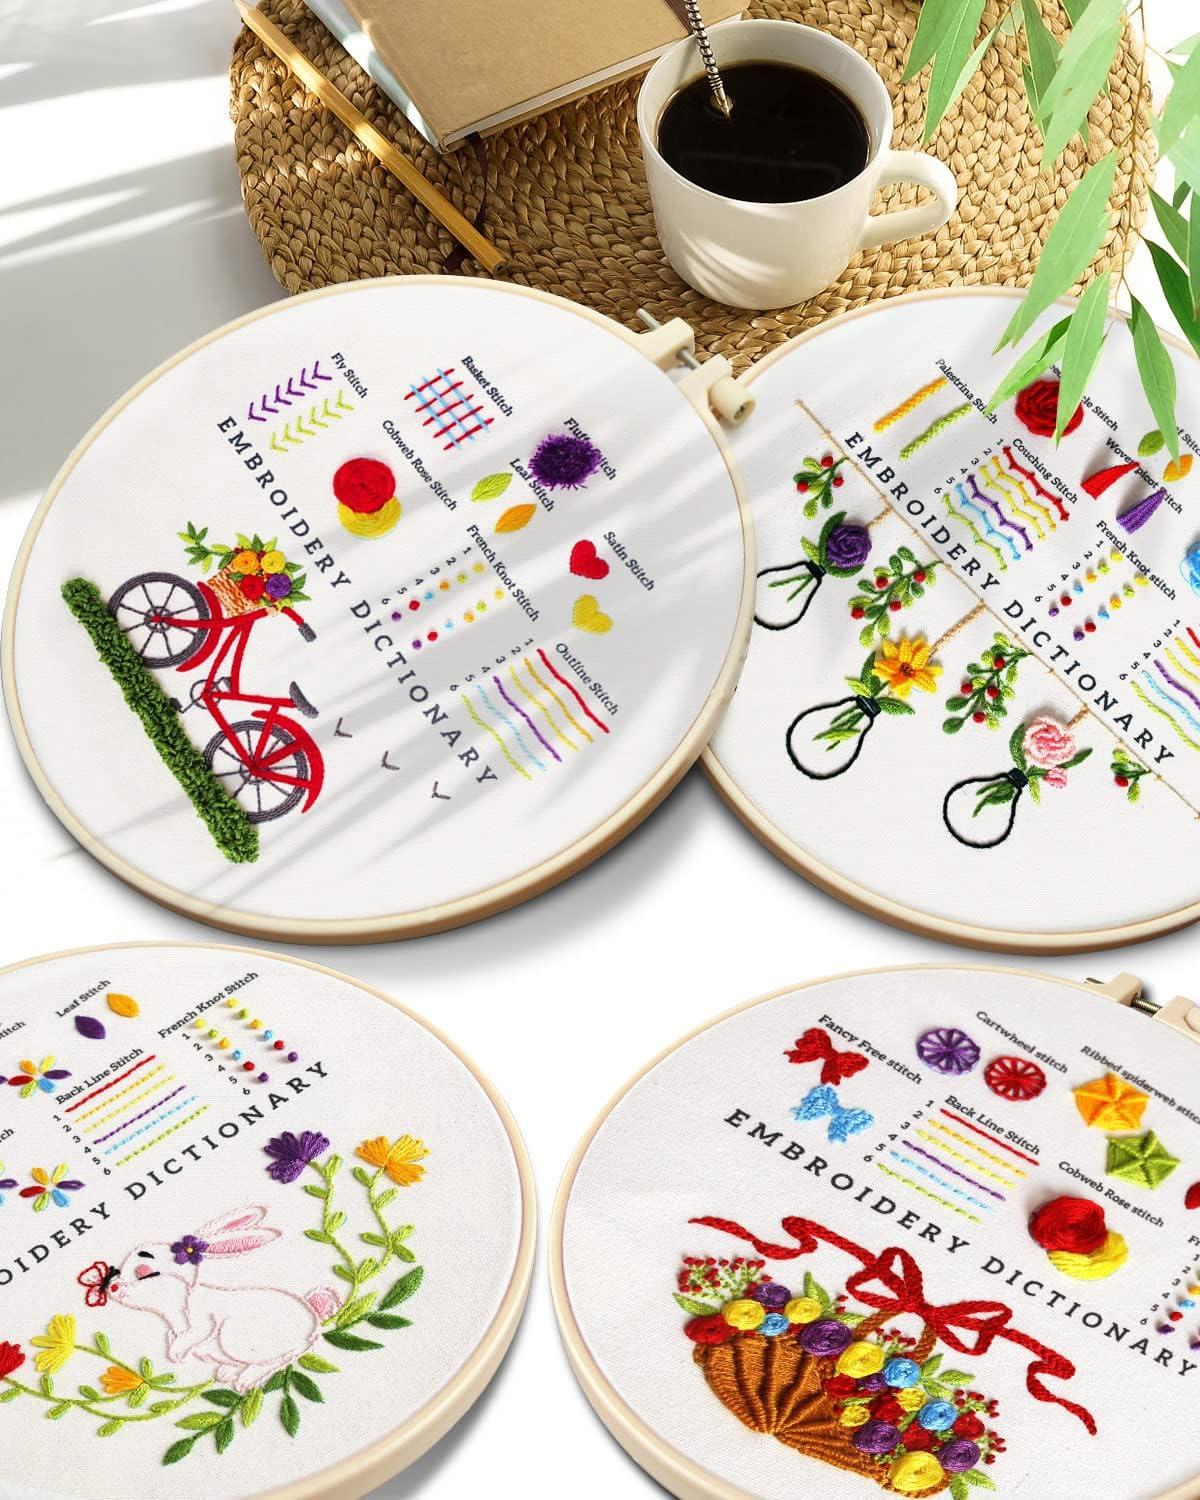 TINDTOP Embroidery Kit for Beginners 4 Pack Cross Stitch Practice Kits for  Beginners Include Embroidery Cloth Hoops Threads for Craft Lover Hand  Stitch with Embroidery Skill Techniques Beginners Embroidery